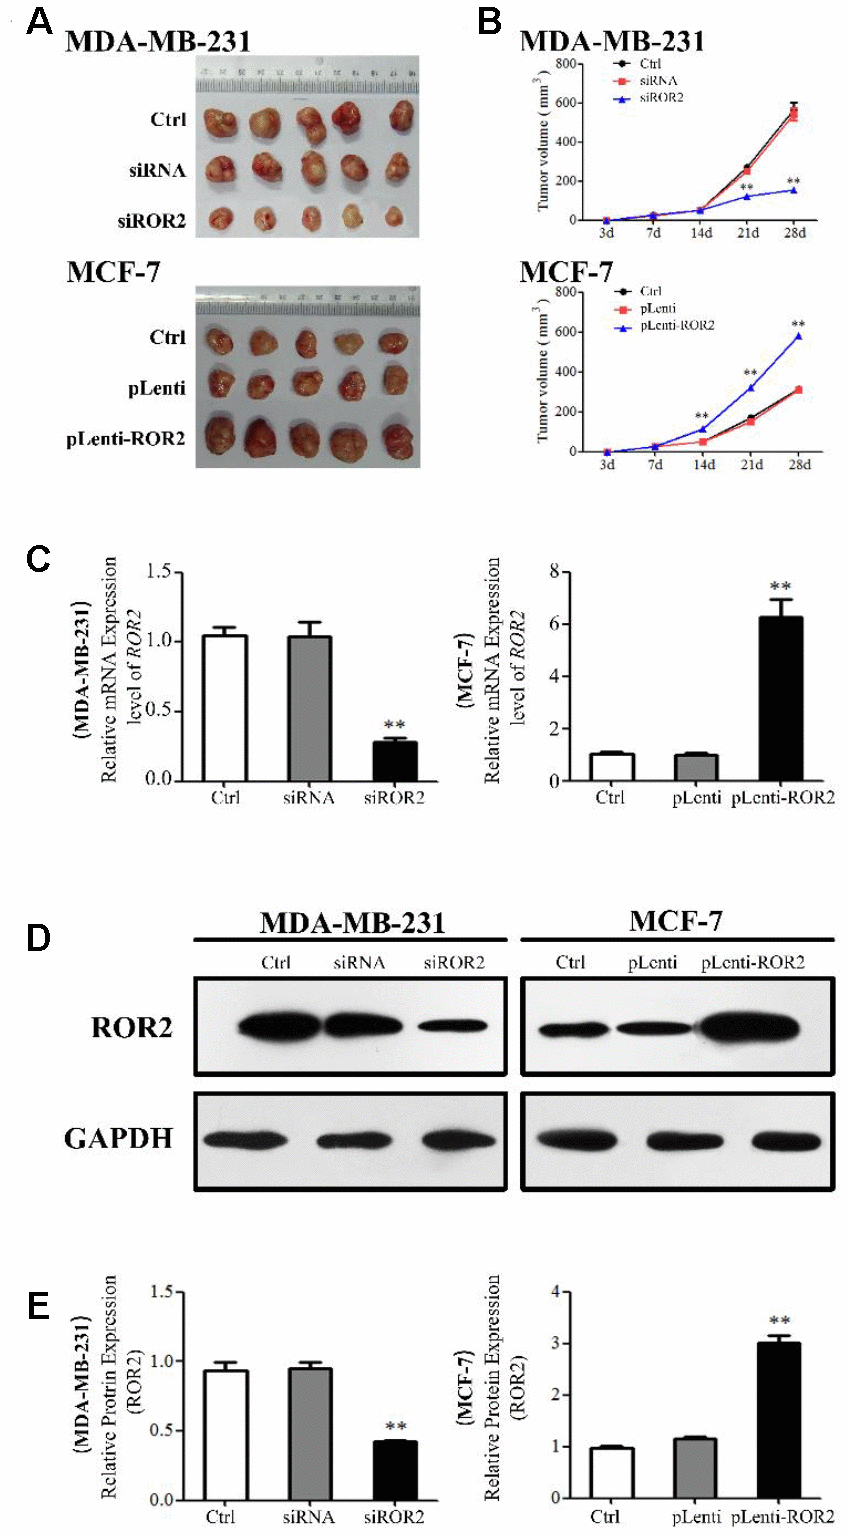 ROR2 promotes BC tumorigenesis in vivo. (A, B) Tumor growth in mice implanted with BC xenografts with suppressed (A) and overexpressed (B) ROR2. (C) qRT-PCR of ROR2 in ectopic tumors. (D, E) Western blotting of ROR2 protein expression in ectopic tumors. *pn=6.